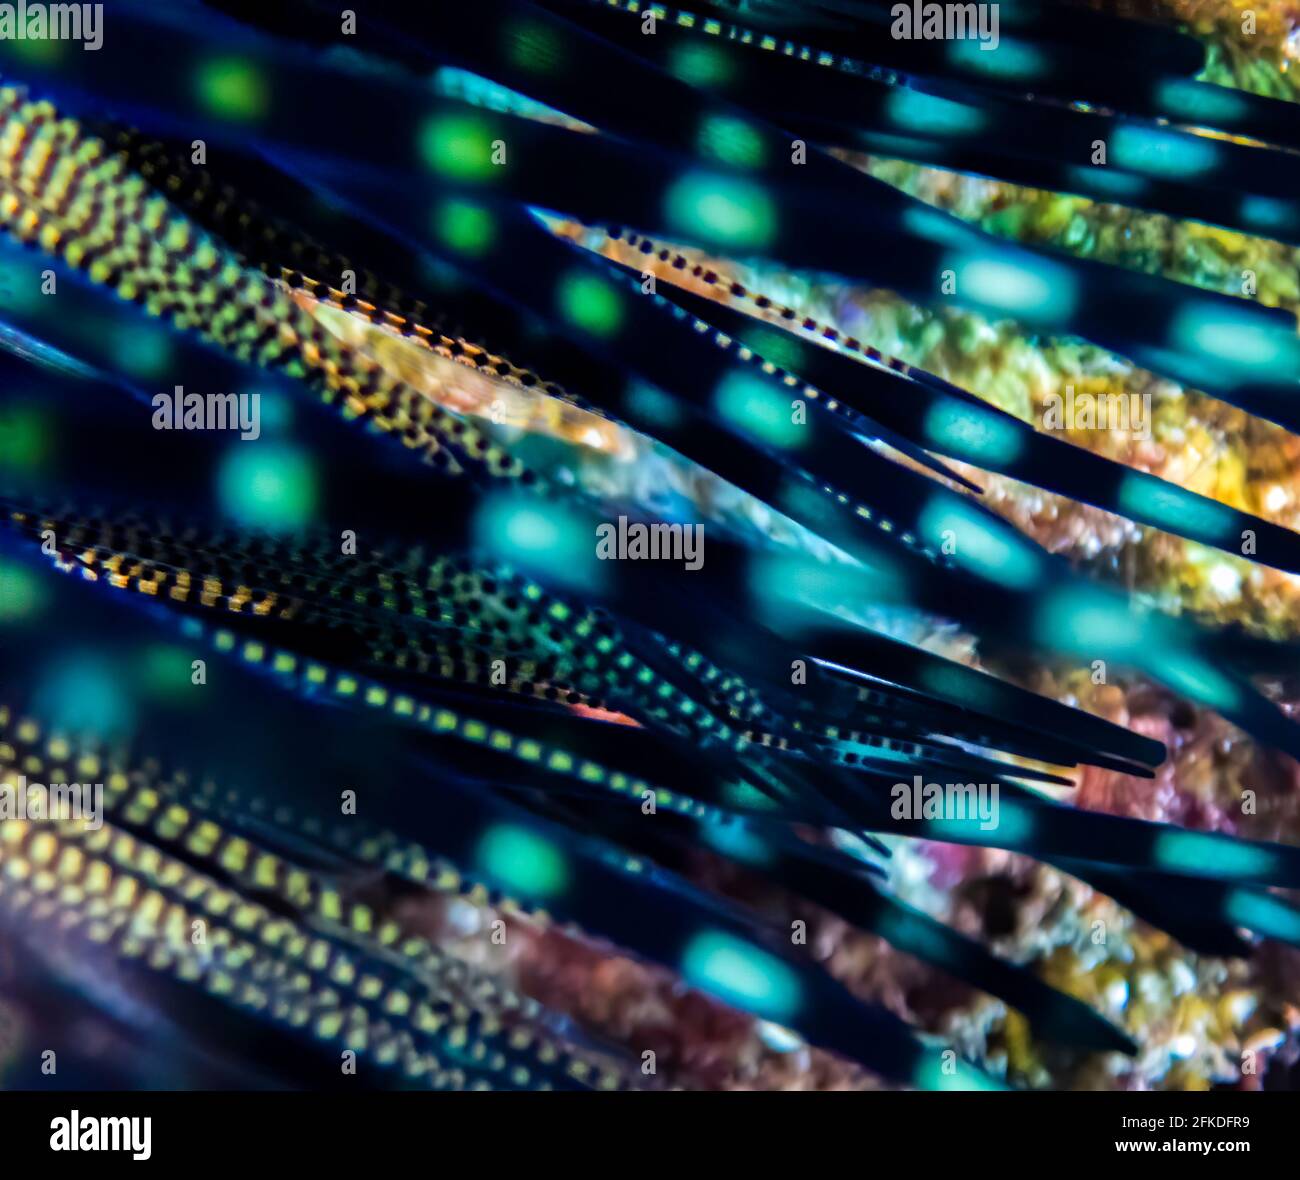 Lines spikes dots in bright neon colors in close up abstract look at a sea urchin underwater. Stock Photo